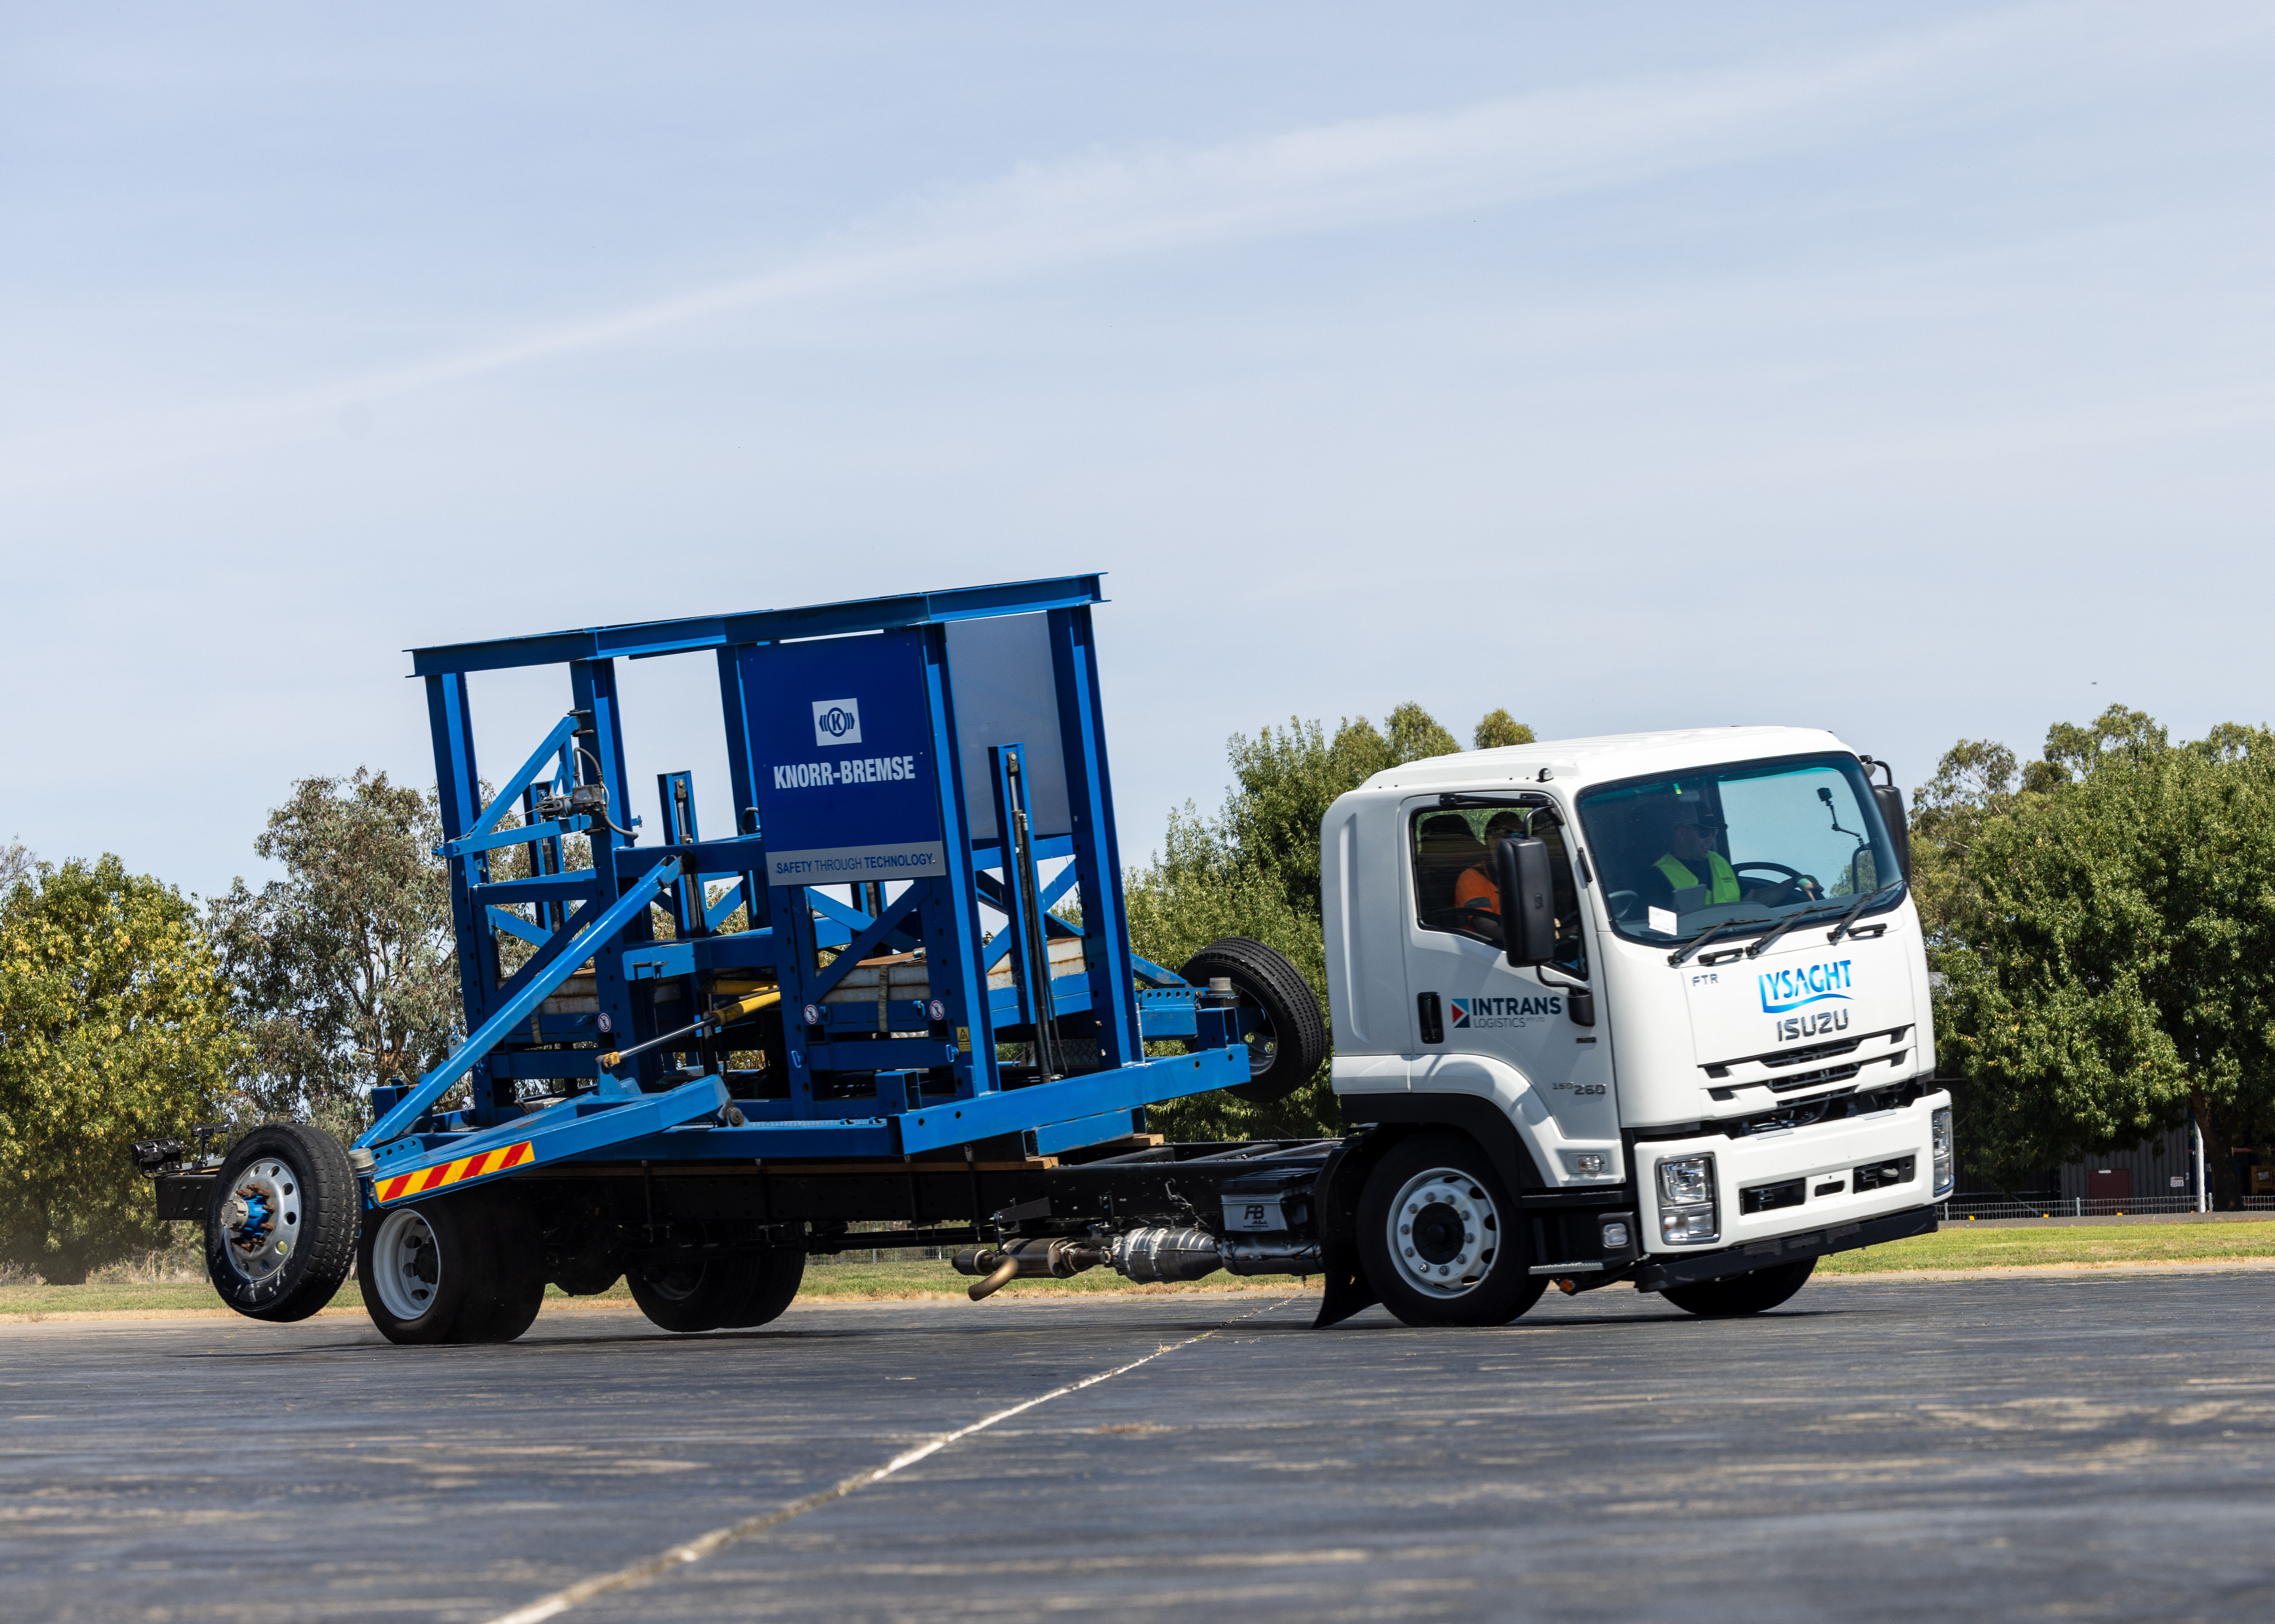 Isuzu FTR 150-260 fitted with a test body customised for Knorr-Bremse